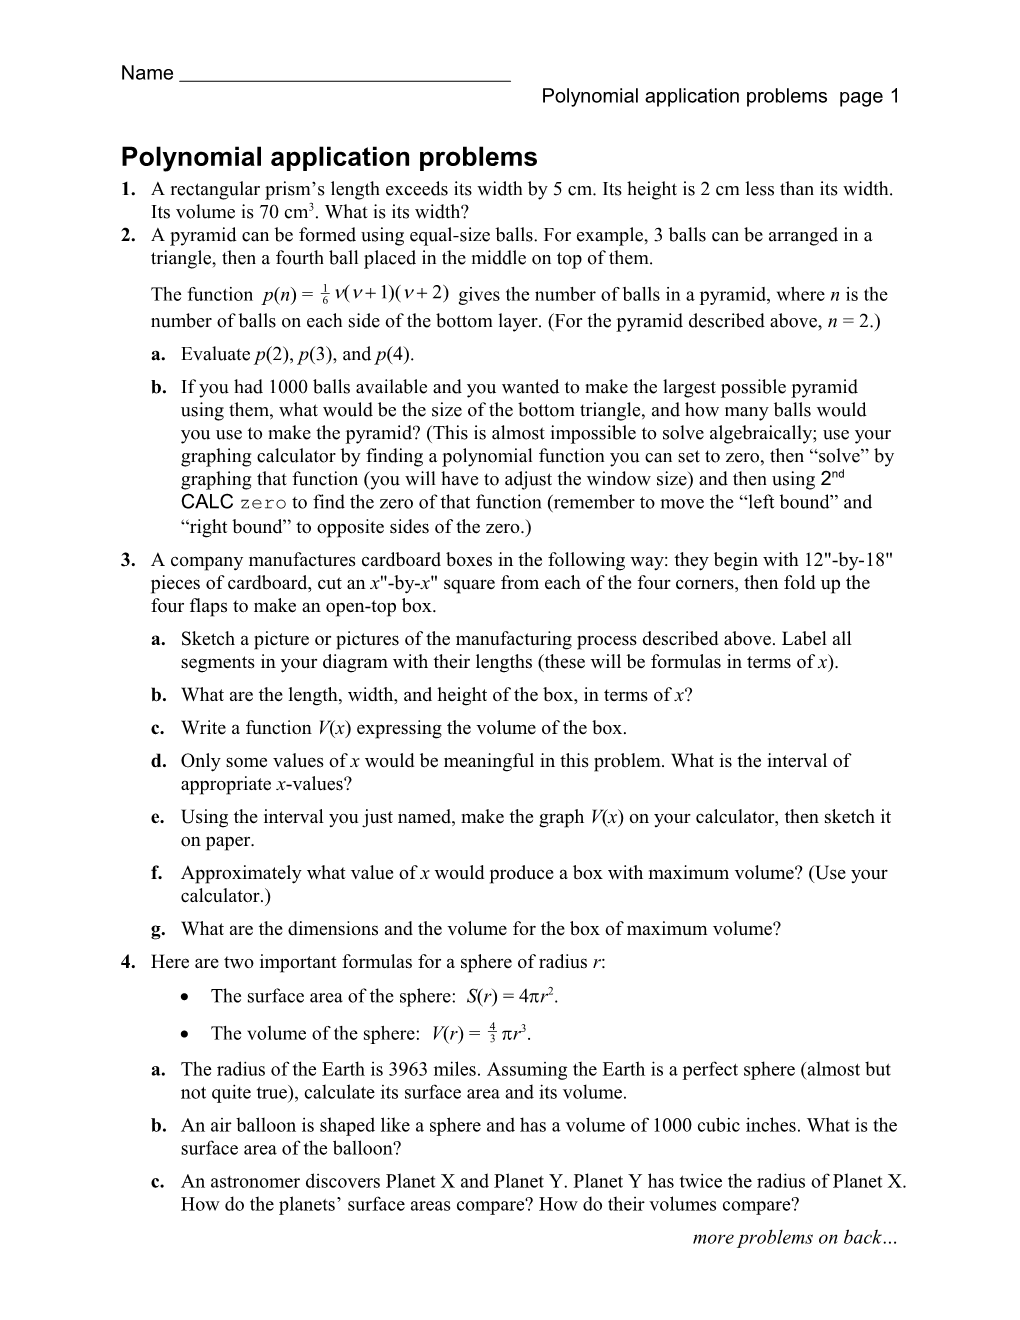 Polynomial Application Problems Page 1